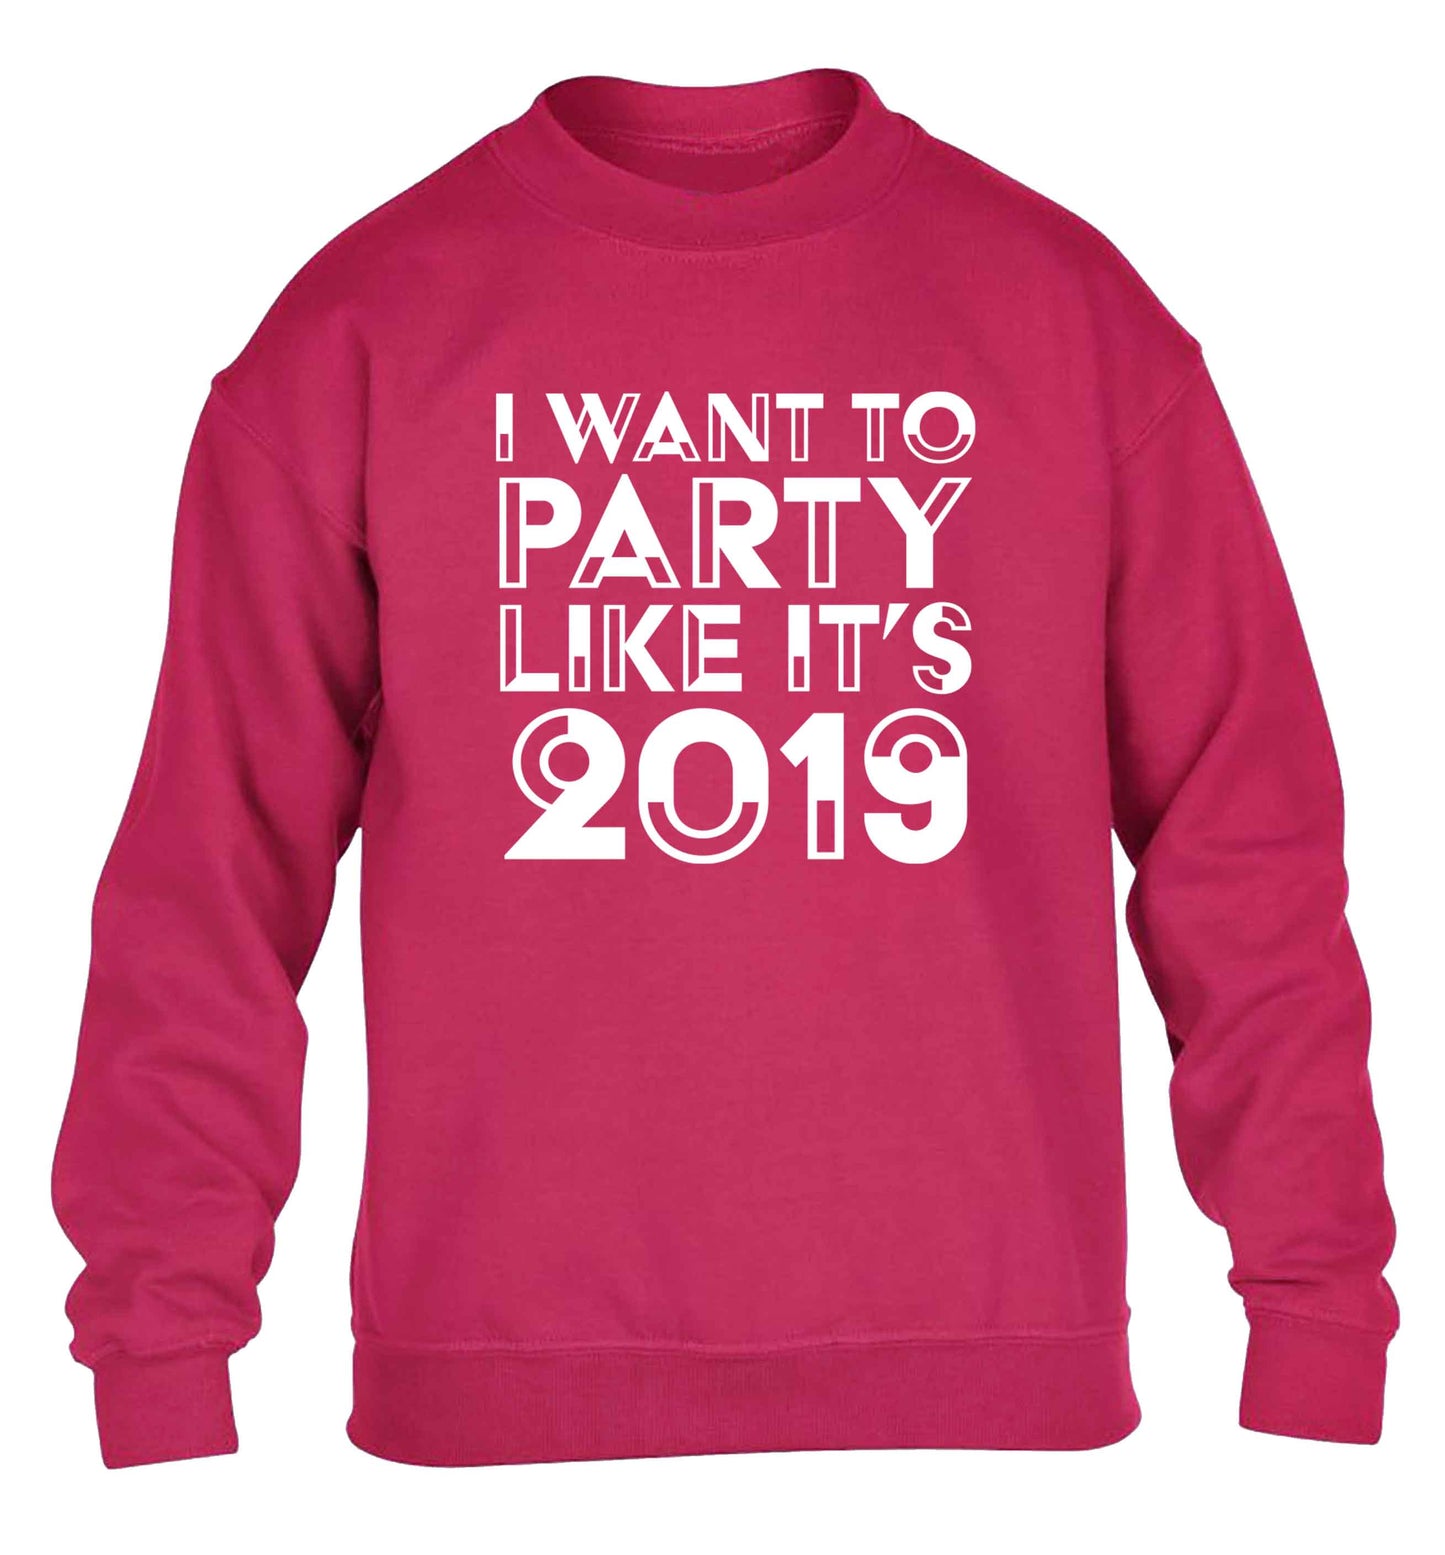 I want to party like it's 2019 children's pink sweater 12-13 Years